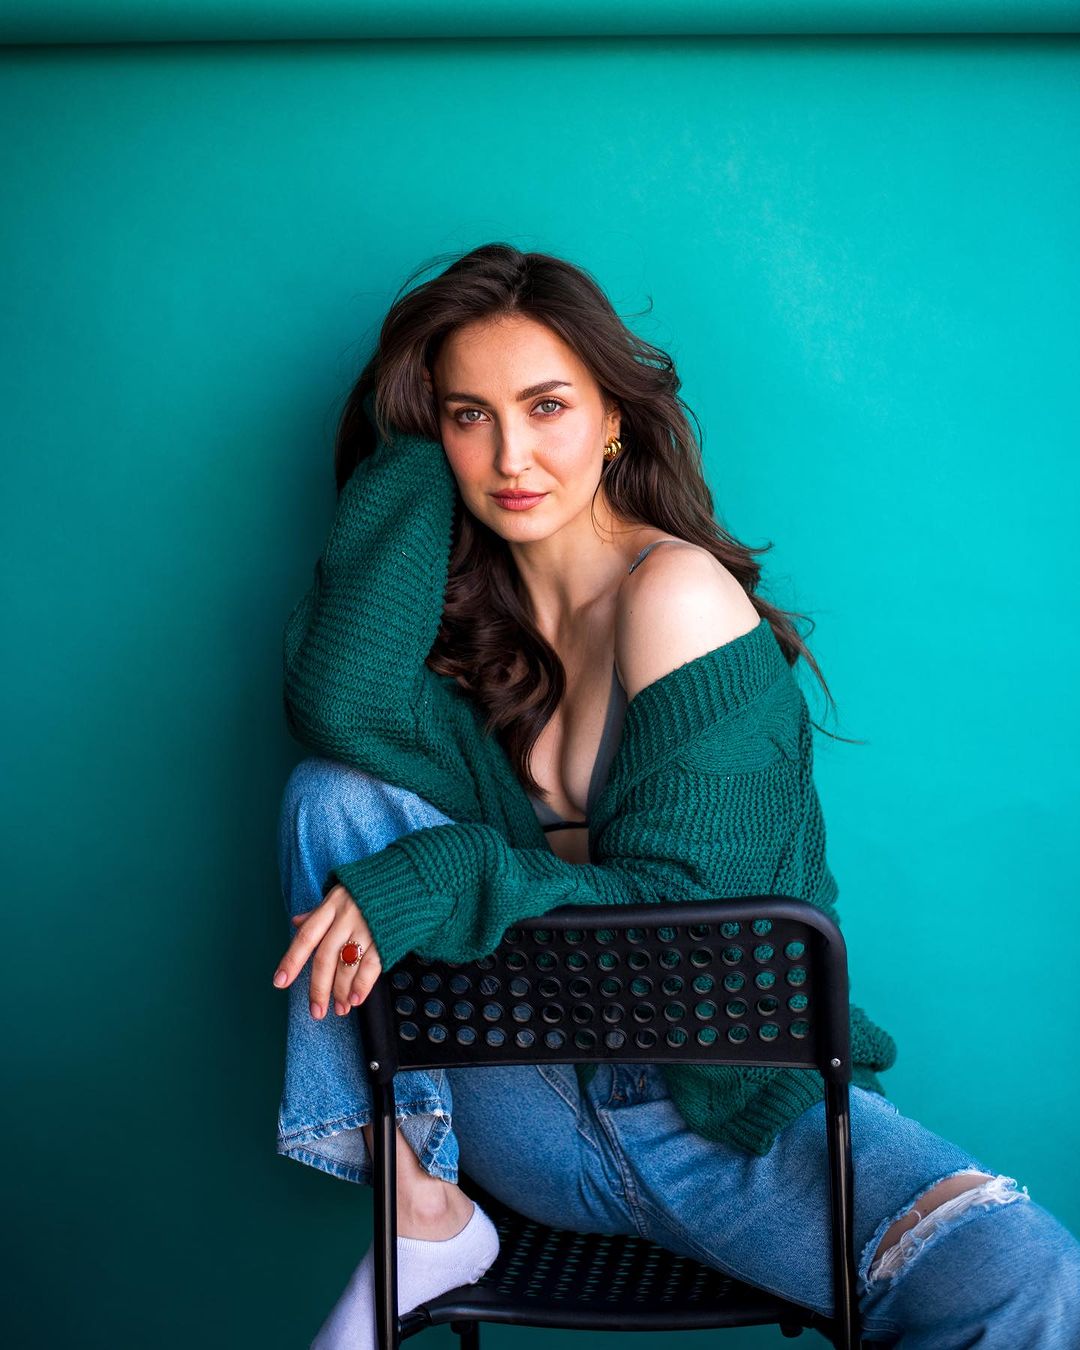 HINDI ACTRESS ELLI AVRRAM IMAGES IN GREEN TOP BLUE JEANS 2